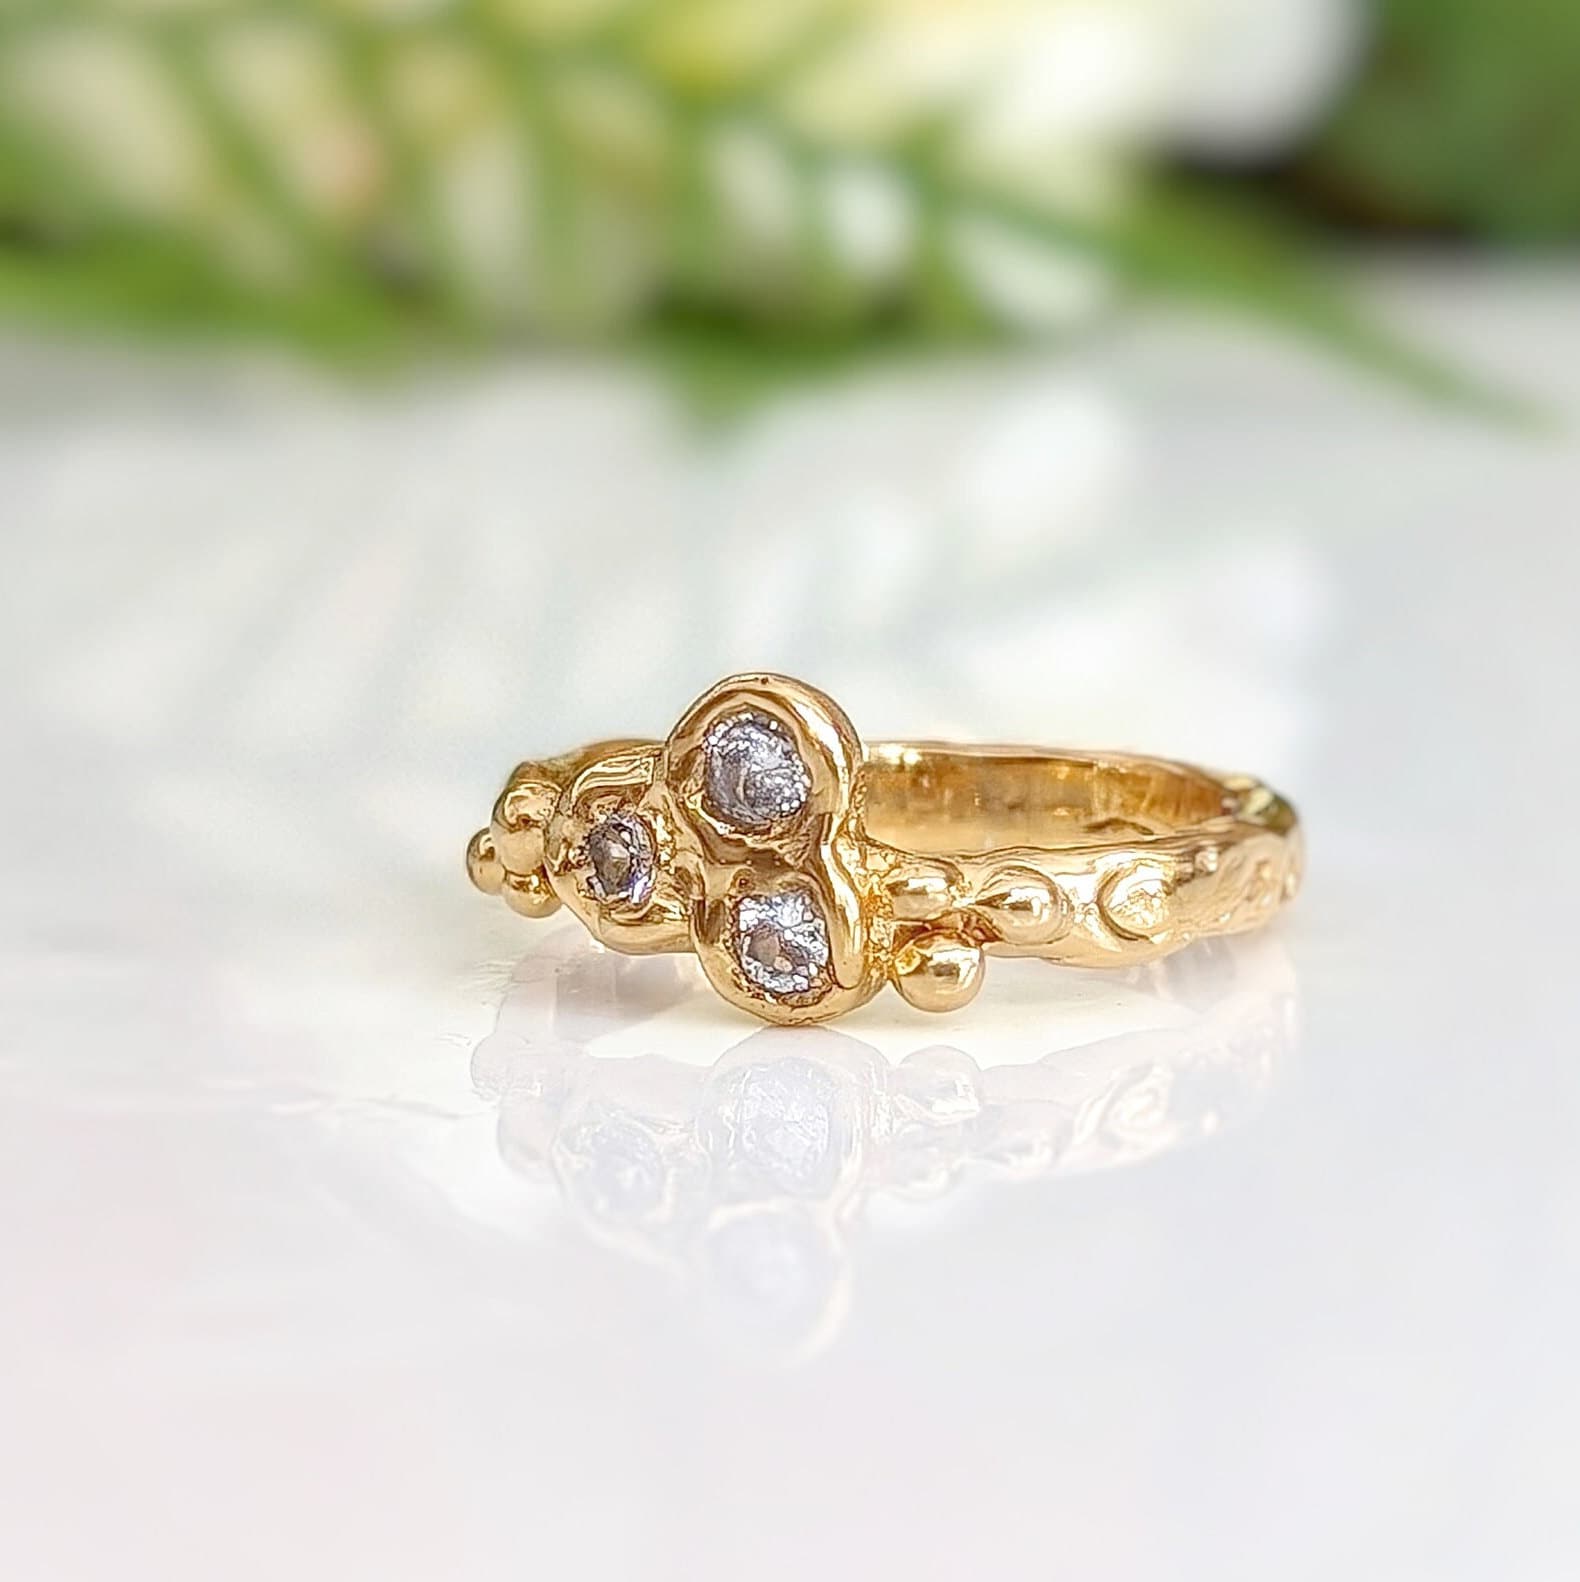 Cluster of 3 small Cubic Zirconias set by prongs on a textured Molten Solid 14k Gold band